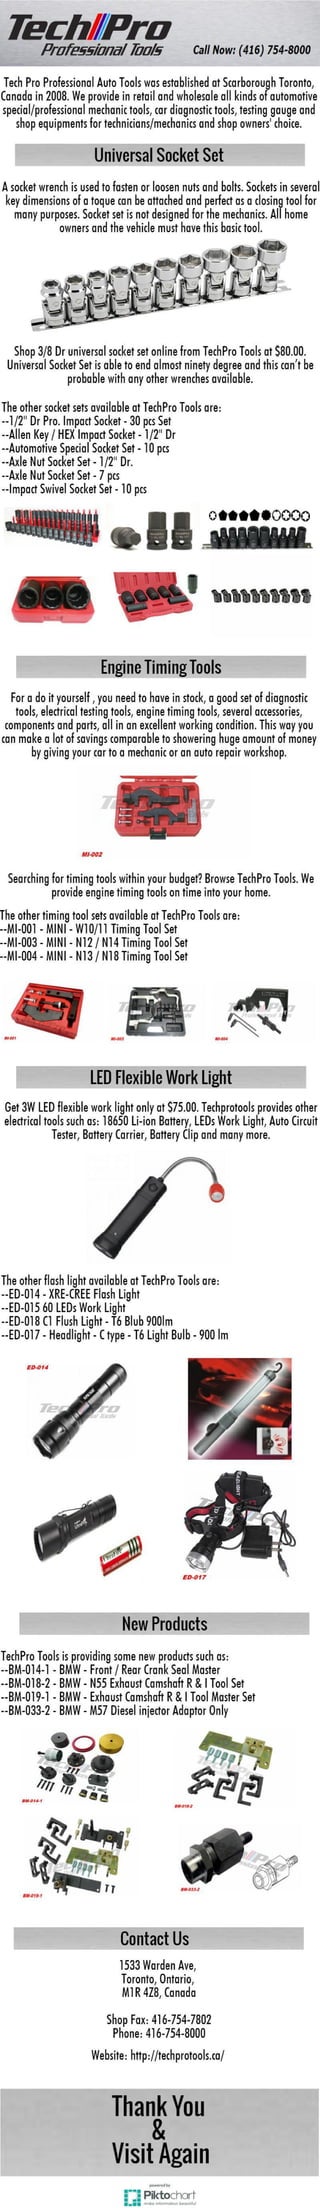 Buy led flexible work light online at tech pro tools